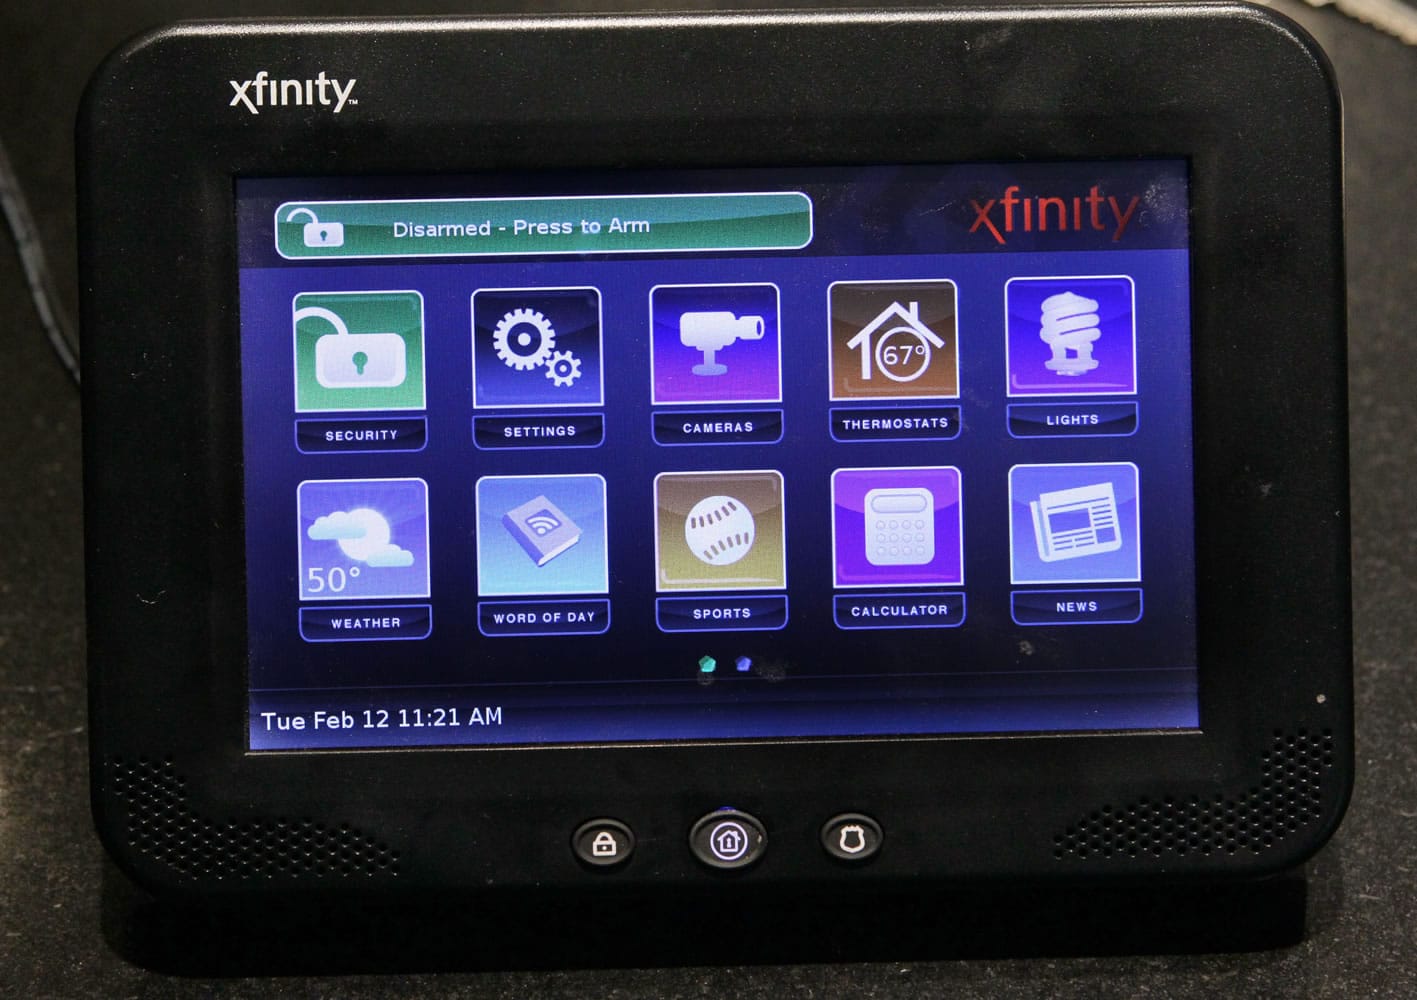 This Comcast XFinity console allows home customer Larry Schweber to control the all-digital security monitoring system at his Atlanta home.